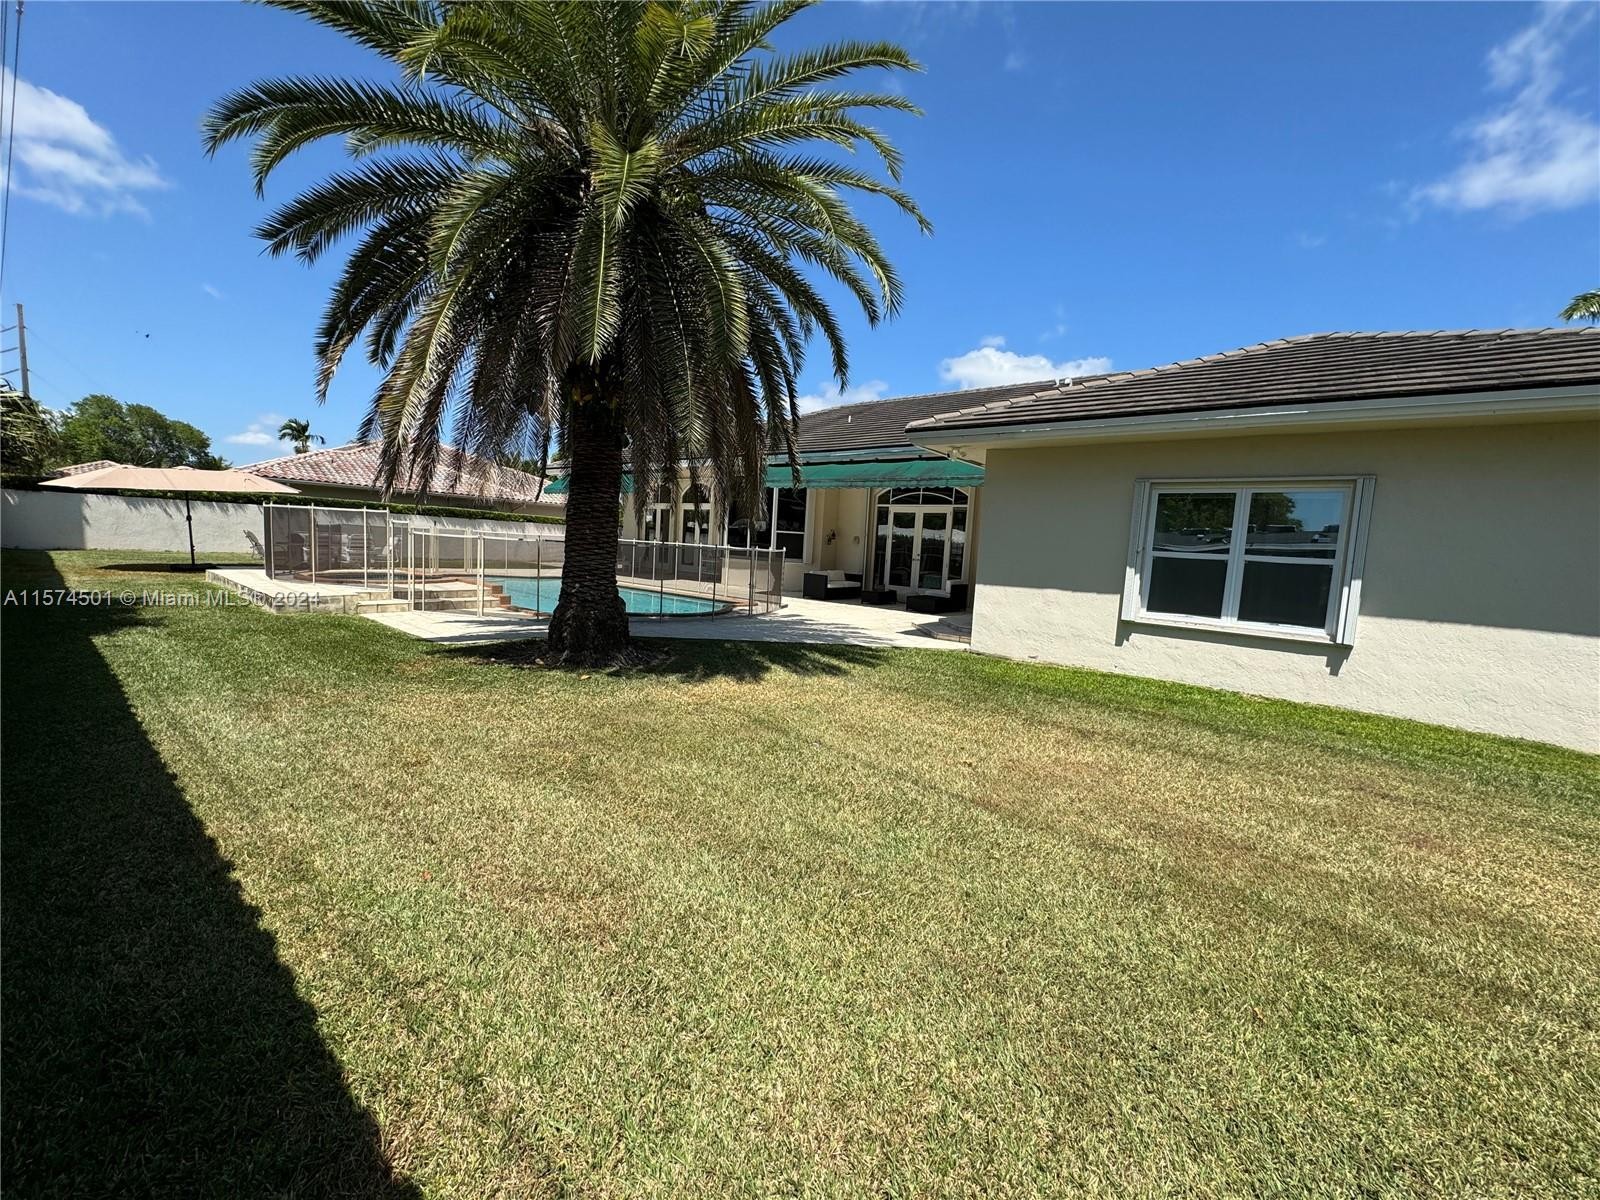 32. 8470 SW 83rd Ct